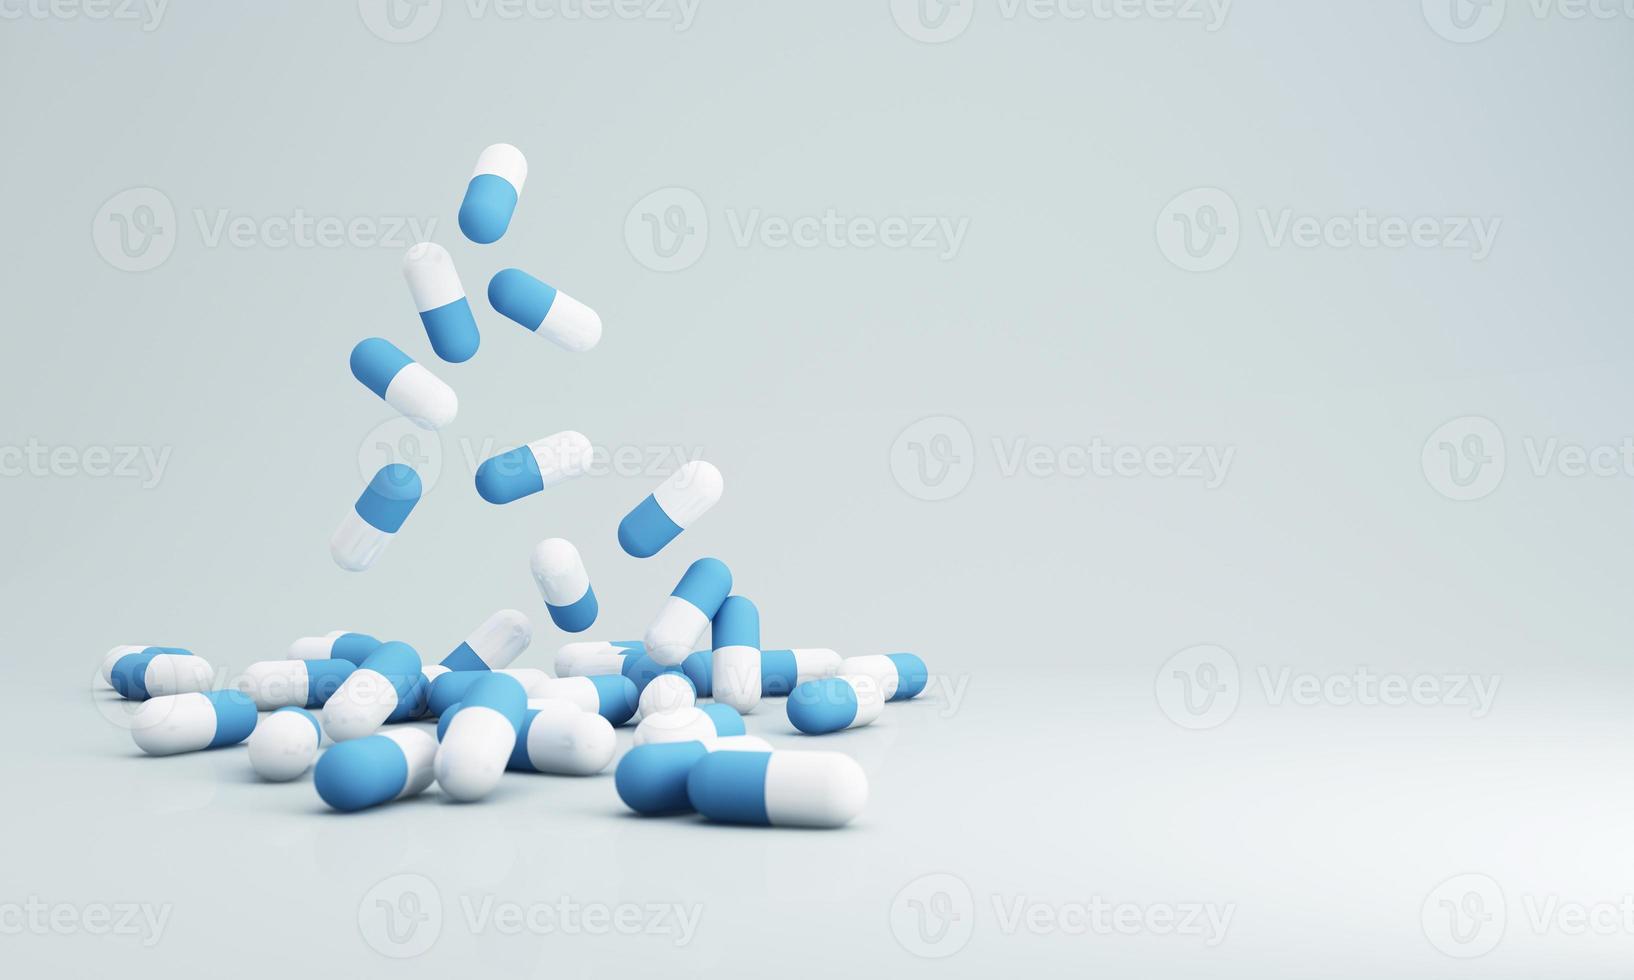 Simple medicines for drugstore category Includes wound bandage, pill box, stethoscope, and vaccine with and lots of pills and capsules. on blue 3d render illustration photo